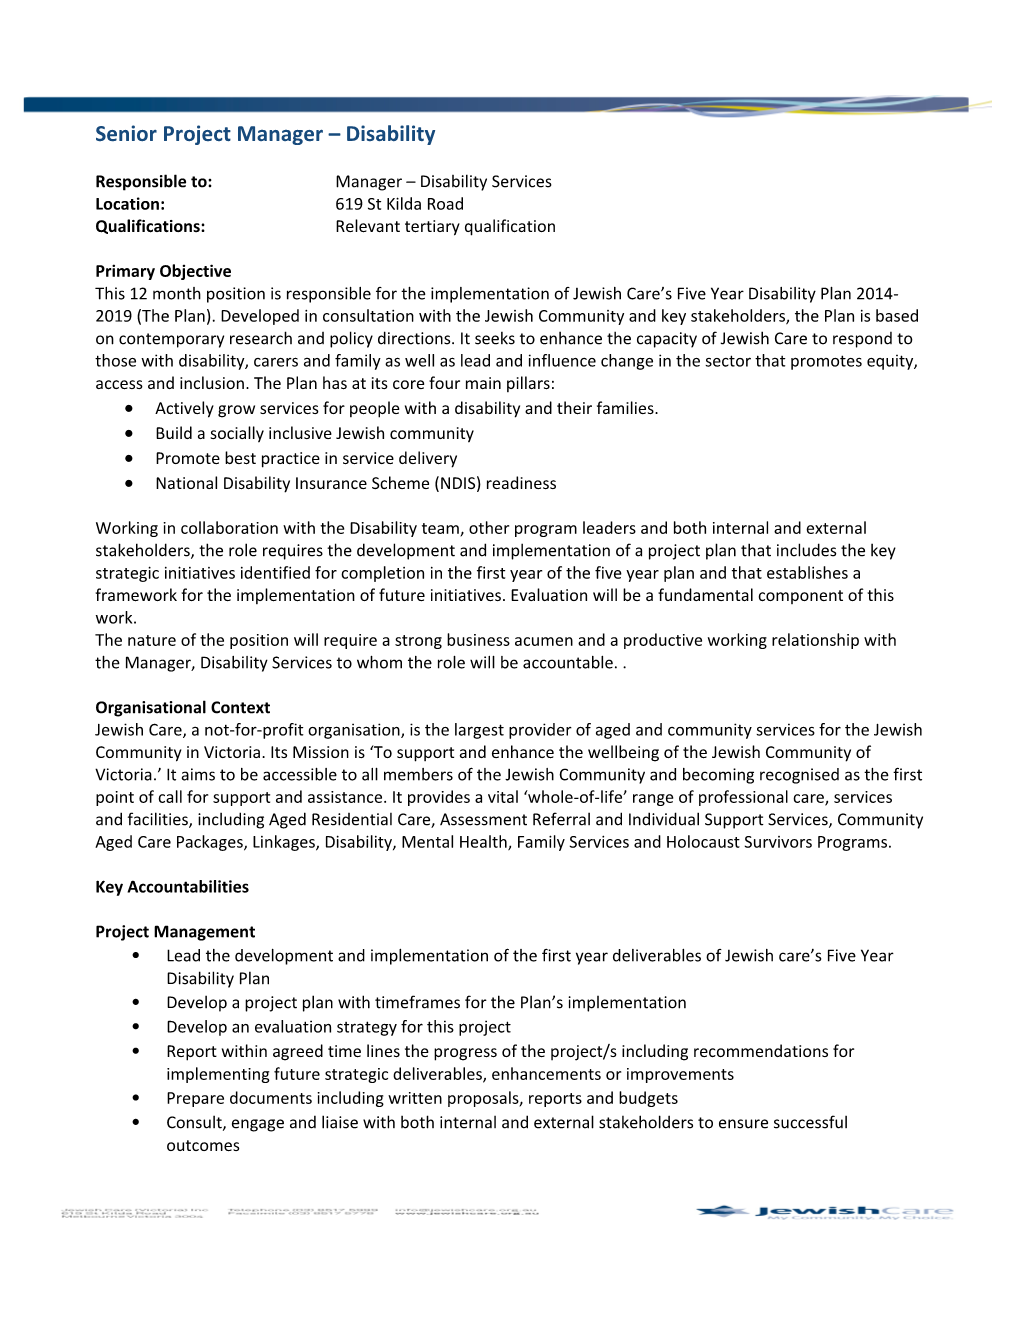 Senior Project Manager Disability